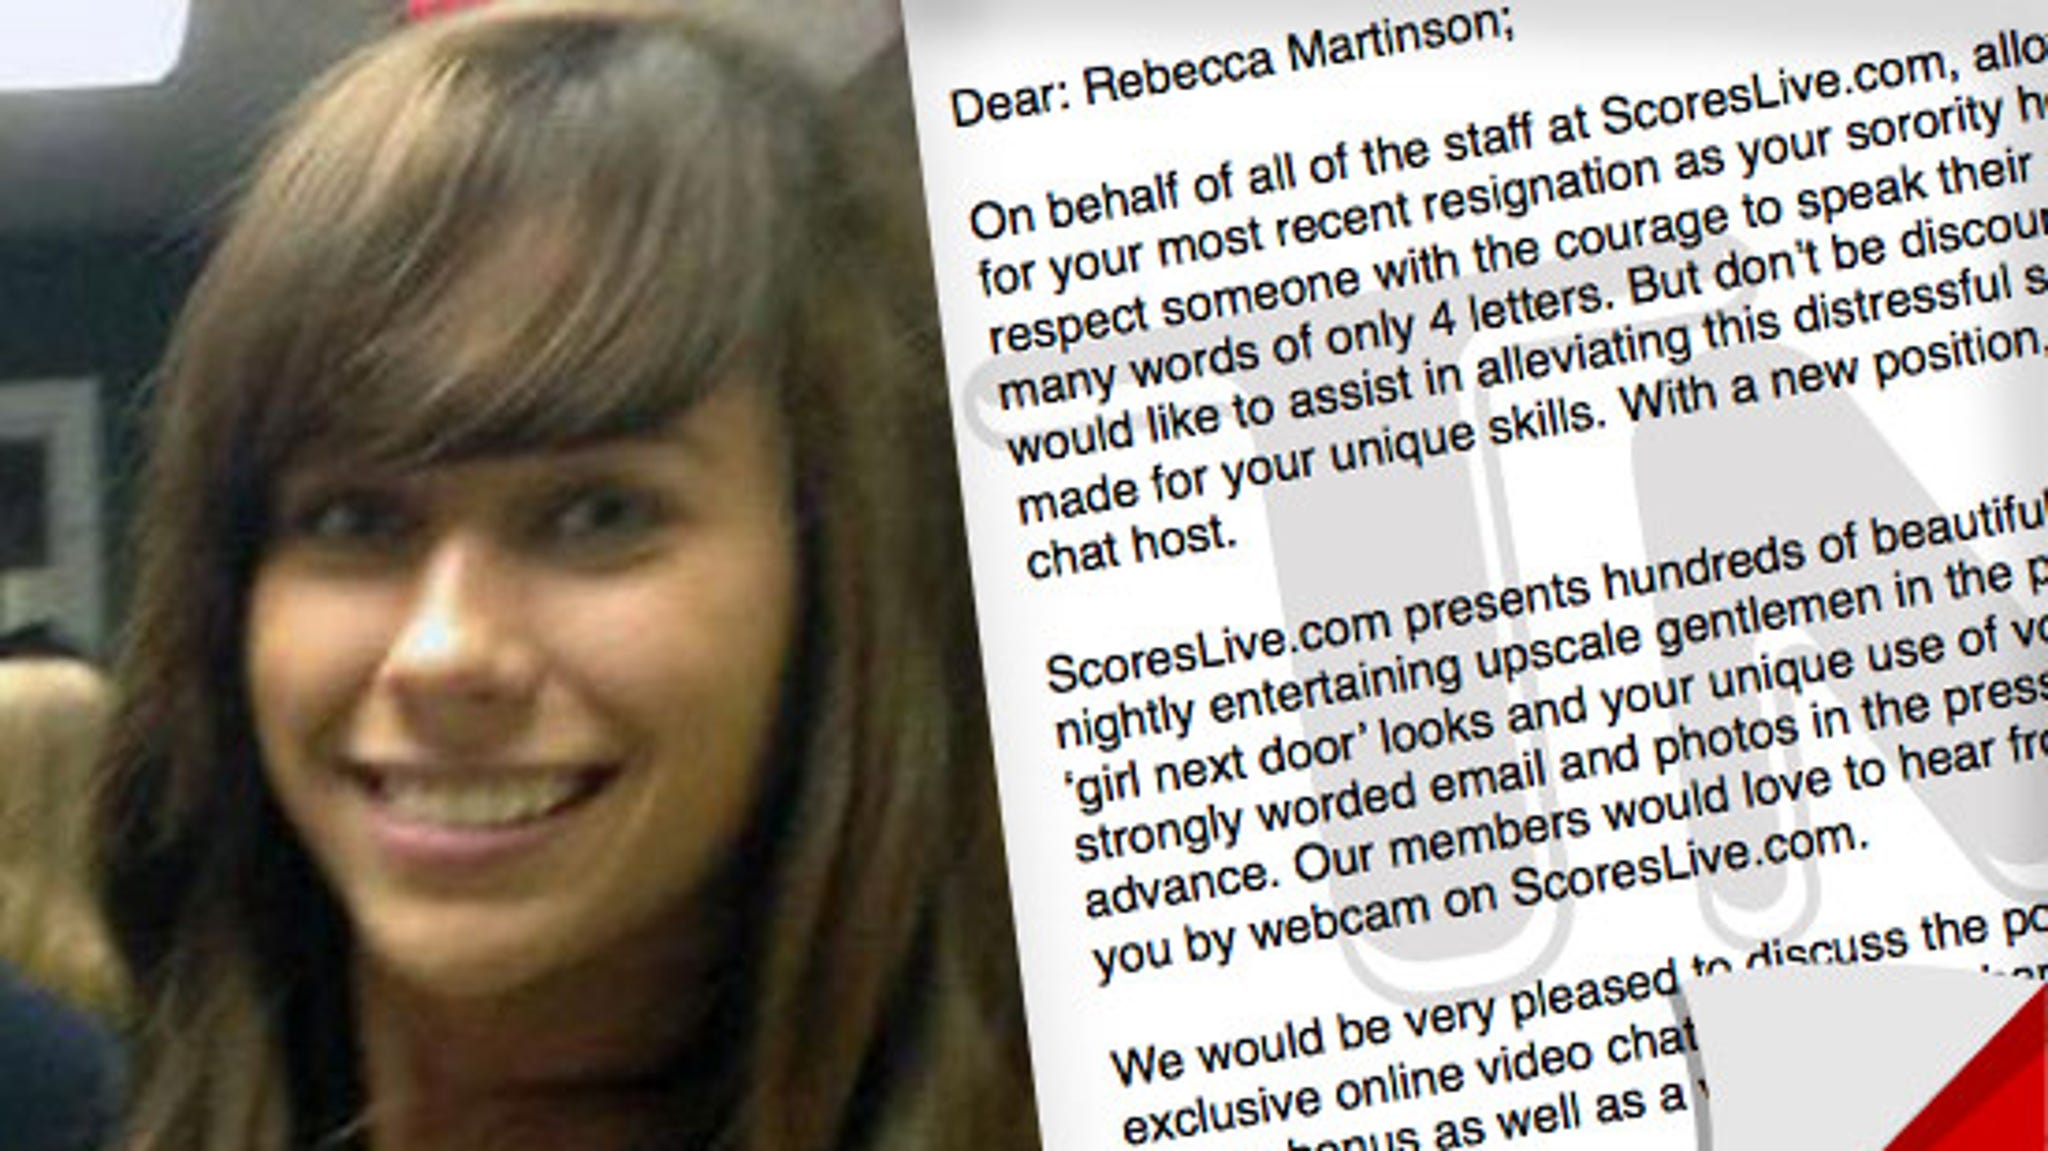 Sorority Emailer Rebecca Martinson Double Fking Newsflash Im Getting A Job Offer At Scores 